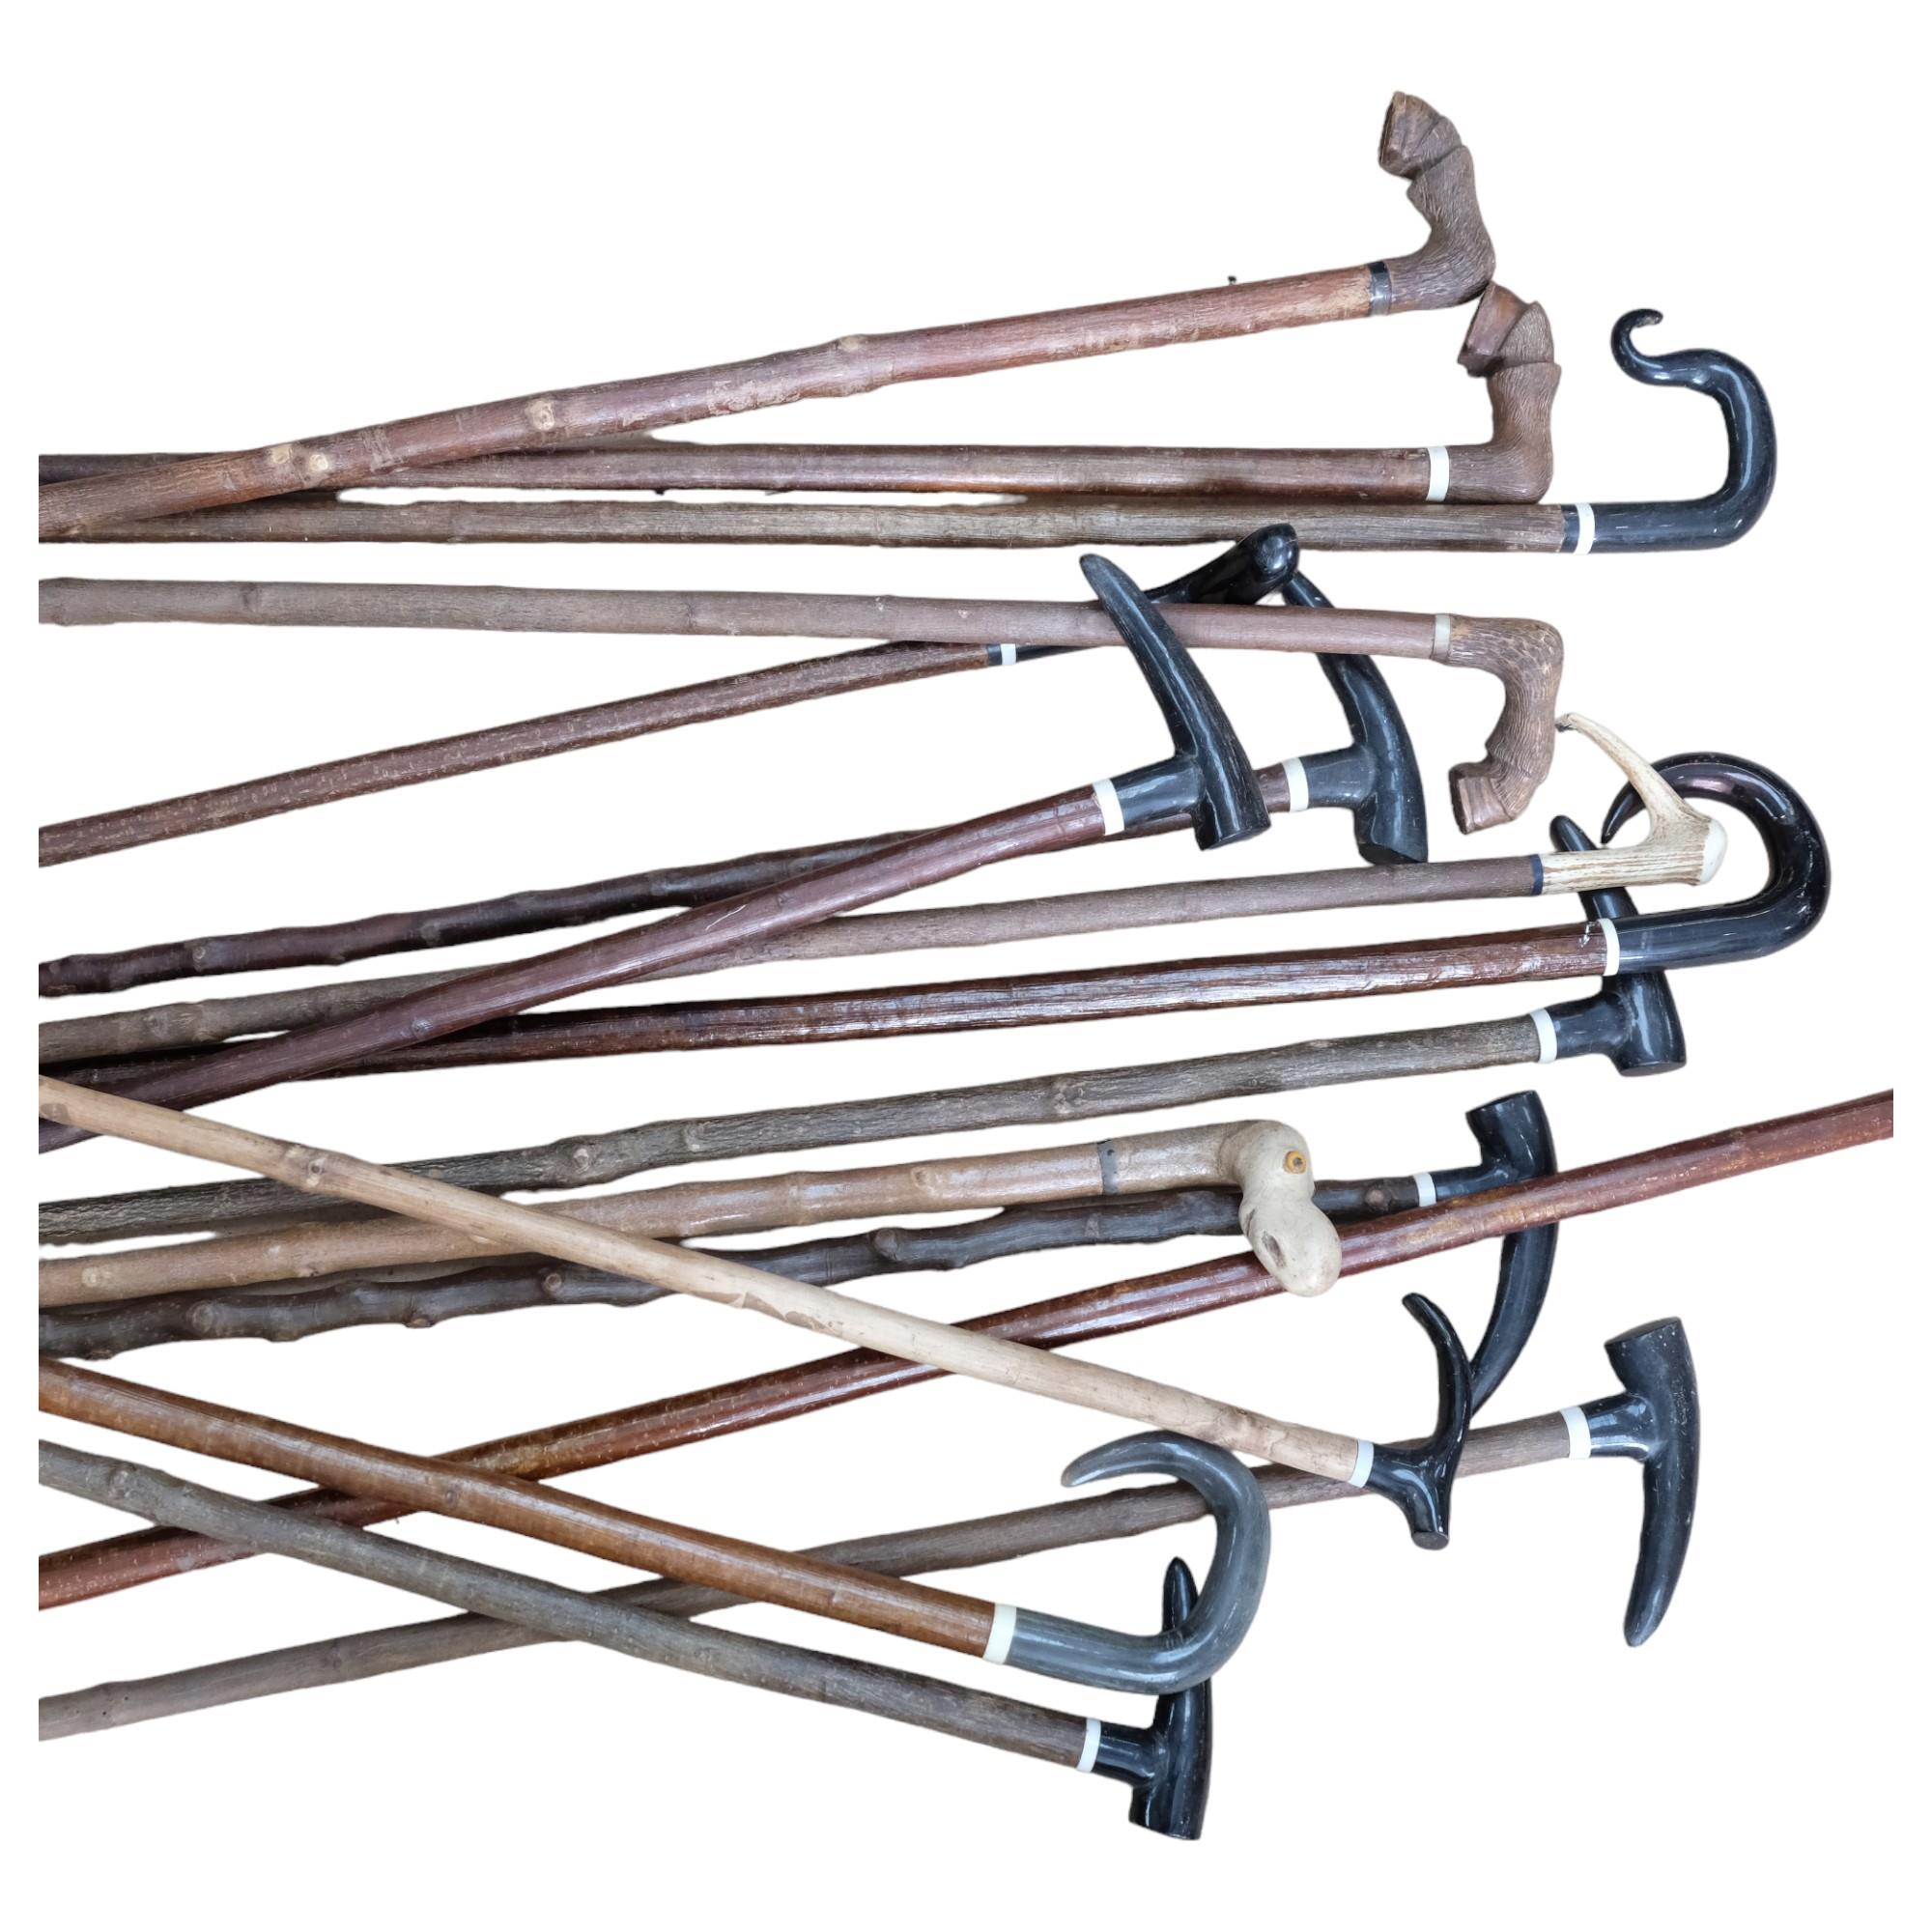 A collection of 17 various walking sticks and staffs, hoof and horn-handled